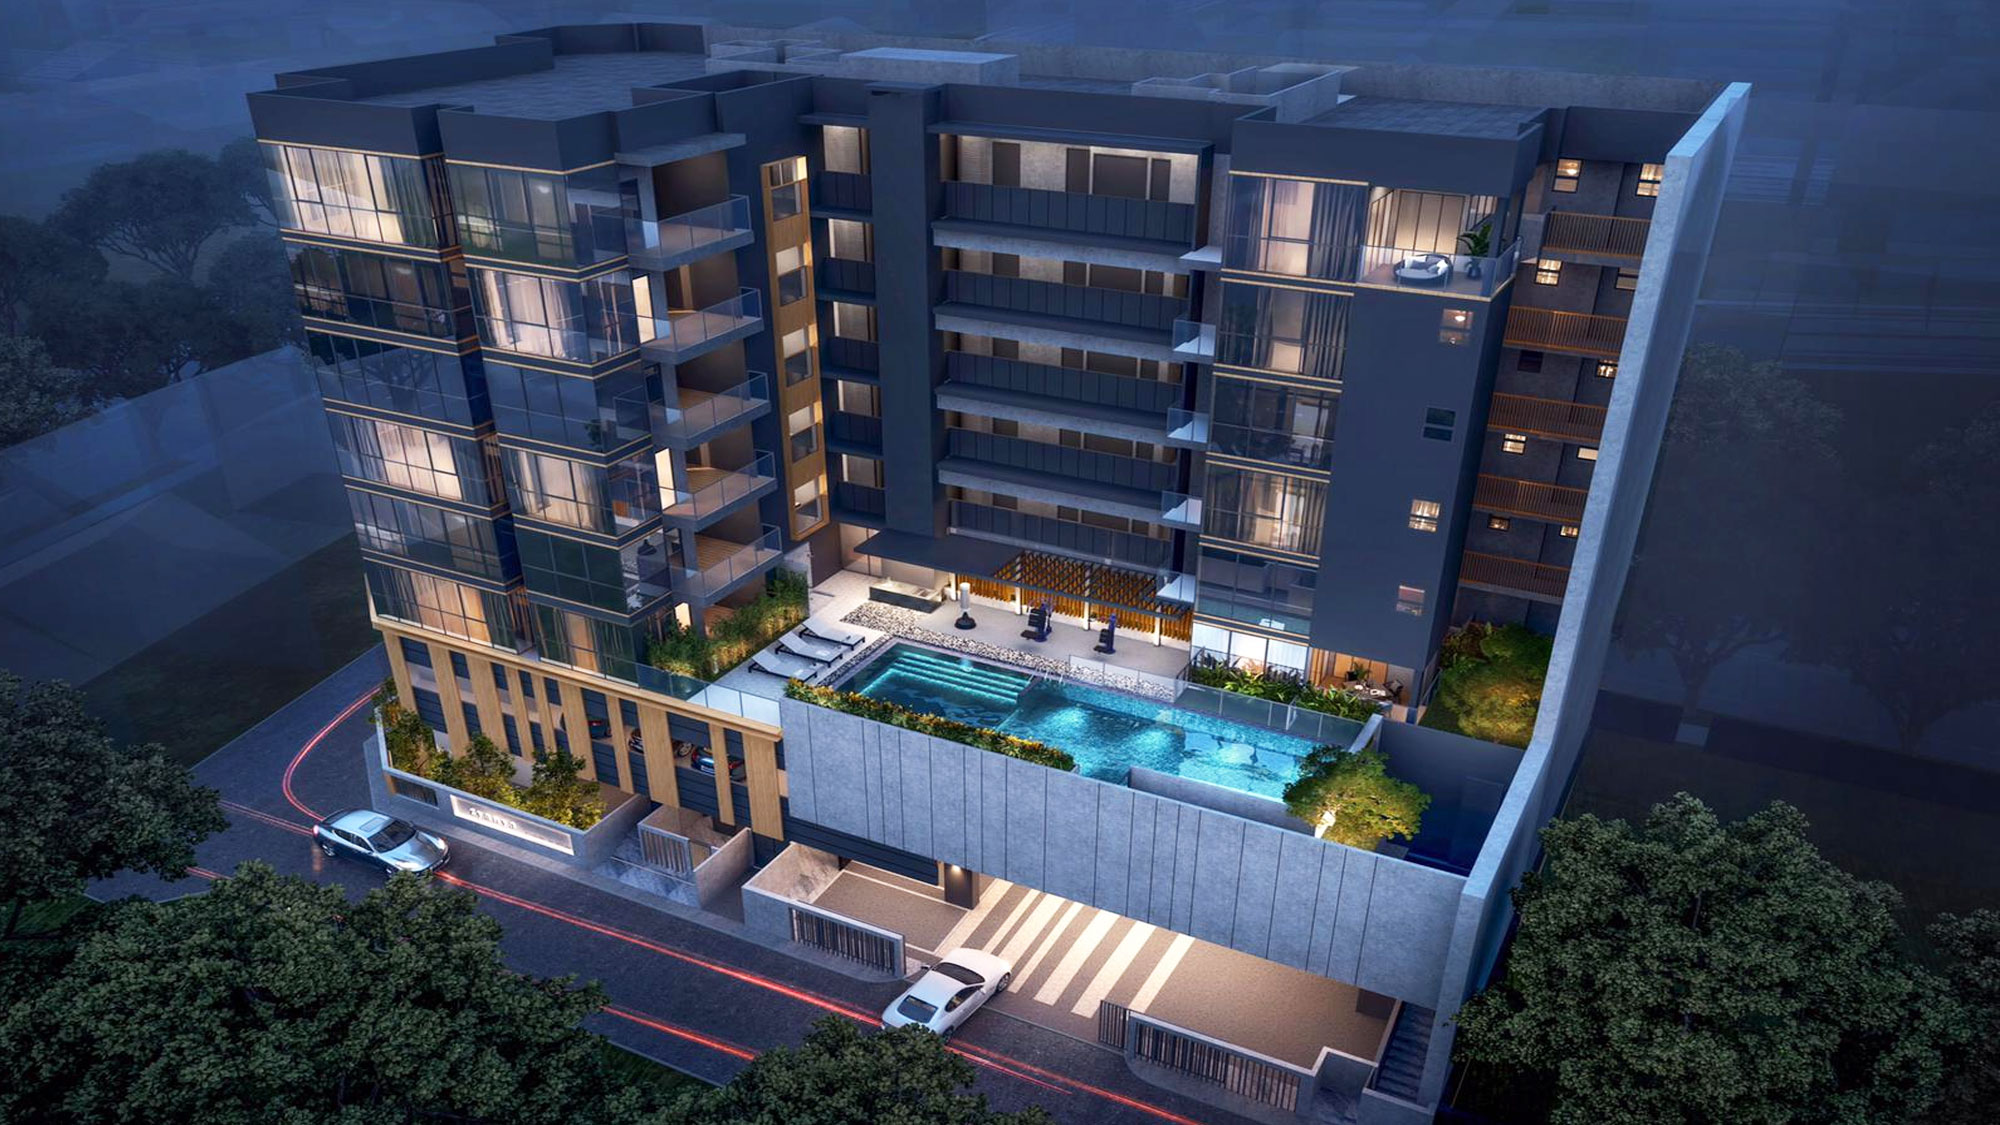 Zyanya Landscape Design - Exclusive apartment with standard facilities for modern life